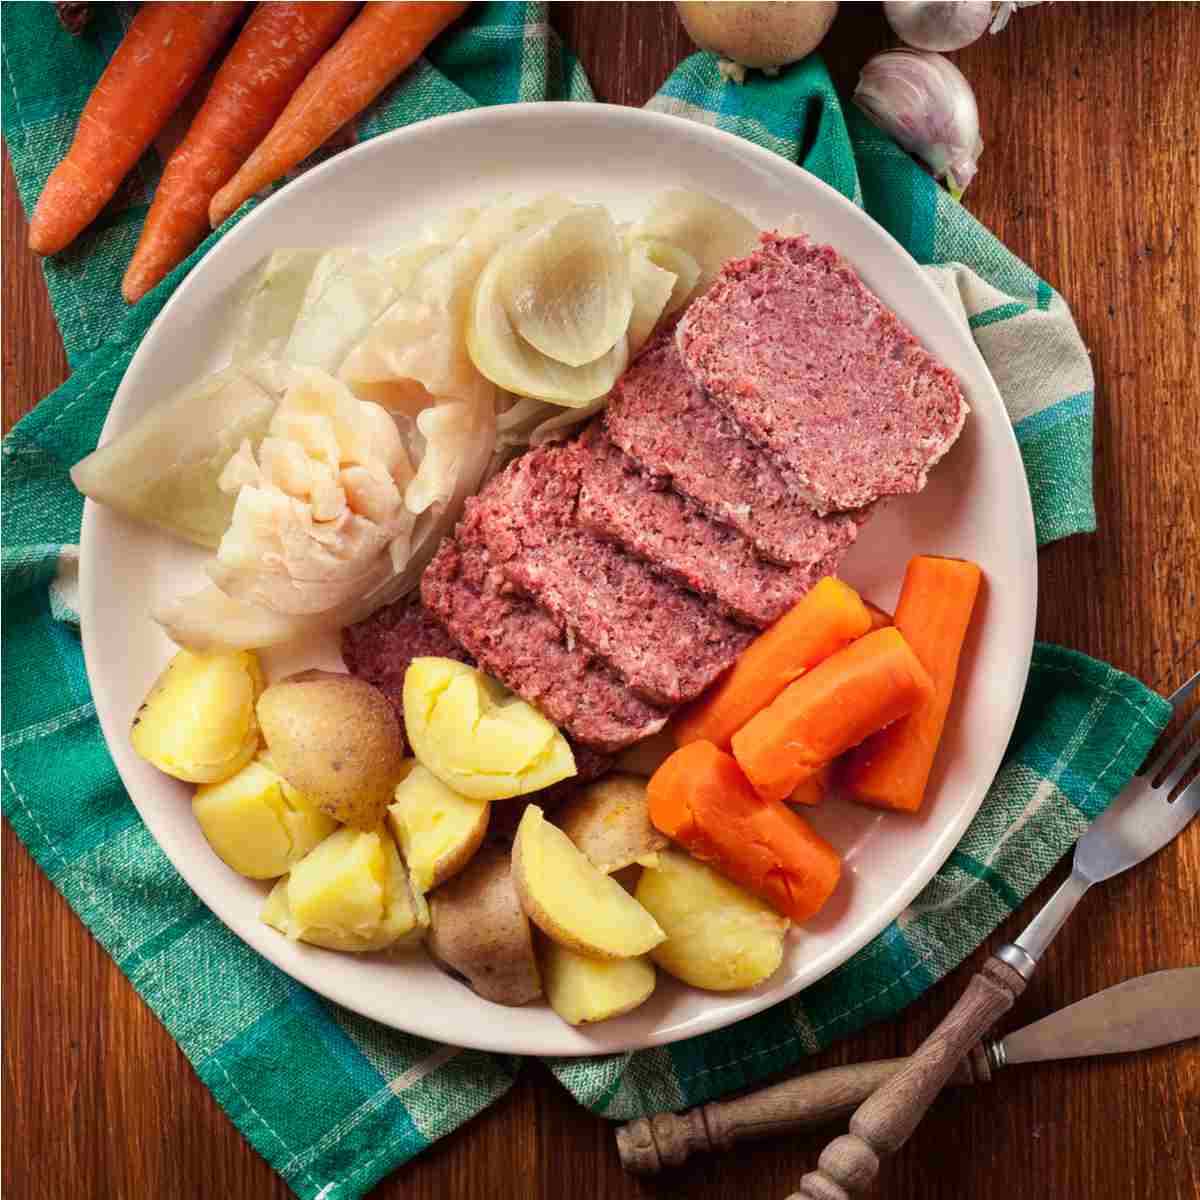 A plate of Irish corned beef and cabbage with potatoes and carrots on top of a green napkin next to a fork and knife.